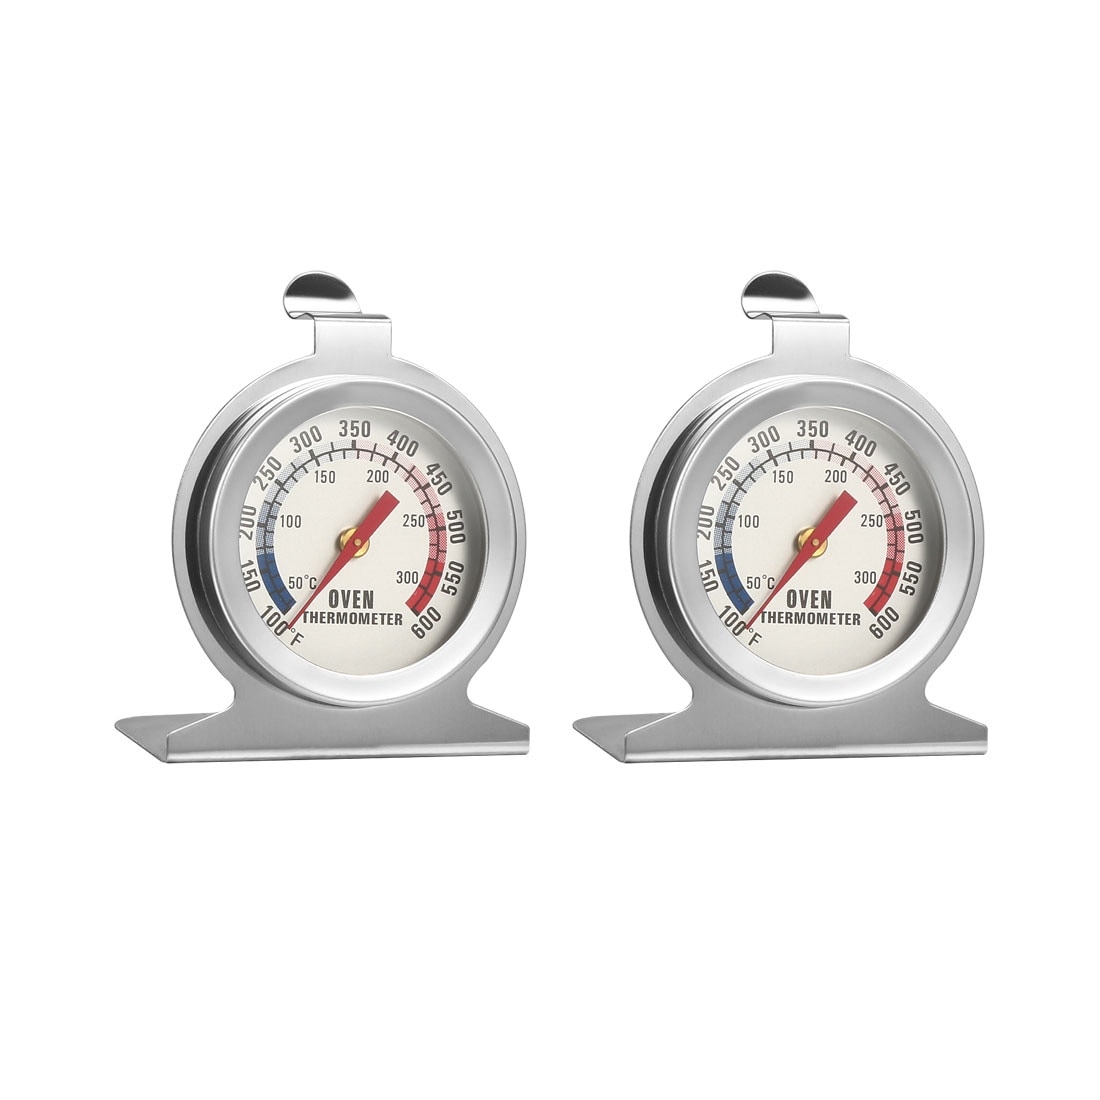 https://ak1.ostkcdn.com/images/products/is/images/direct/514a5e3acb6349b55b9fd638053009957a6c4c57/Oven-Thermometer-100-600F-Stainless-Steel-Instant-Read-Temperature-Gauge-2pcs.jpg